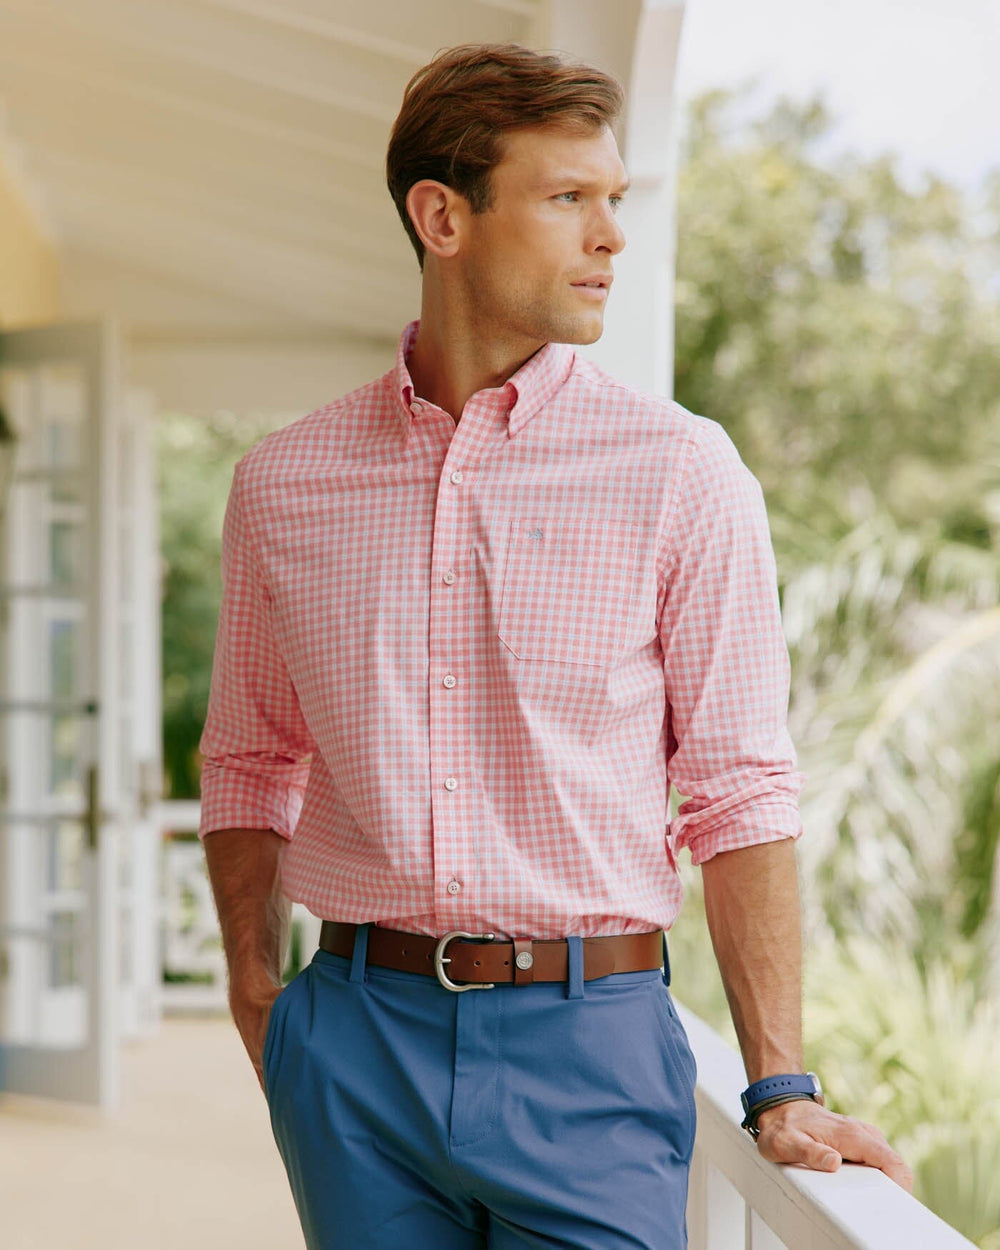 The front view of the Southern Tide Charleston Roanoke Check Long Sleeve Sport Shirt by Southern Tide - Flamingo Pink